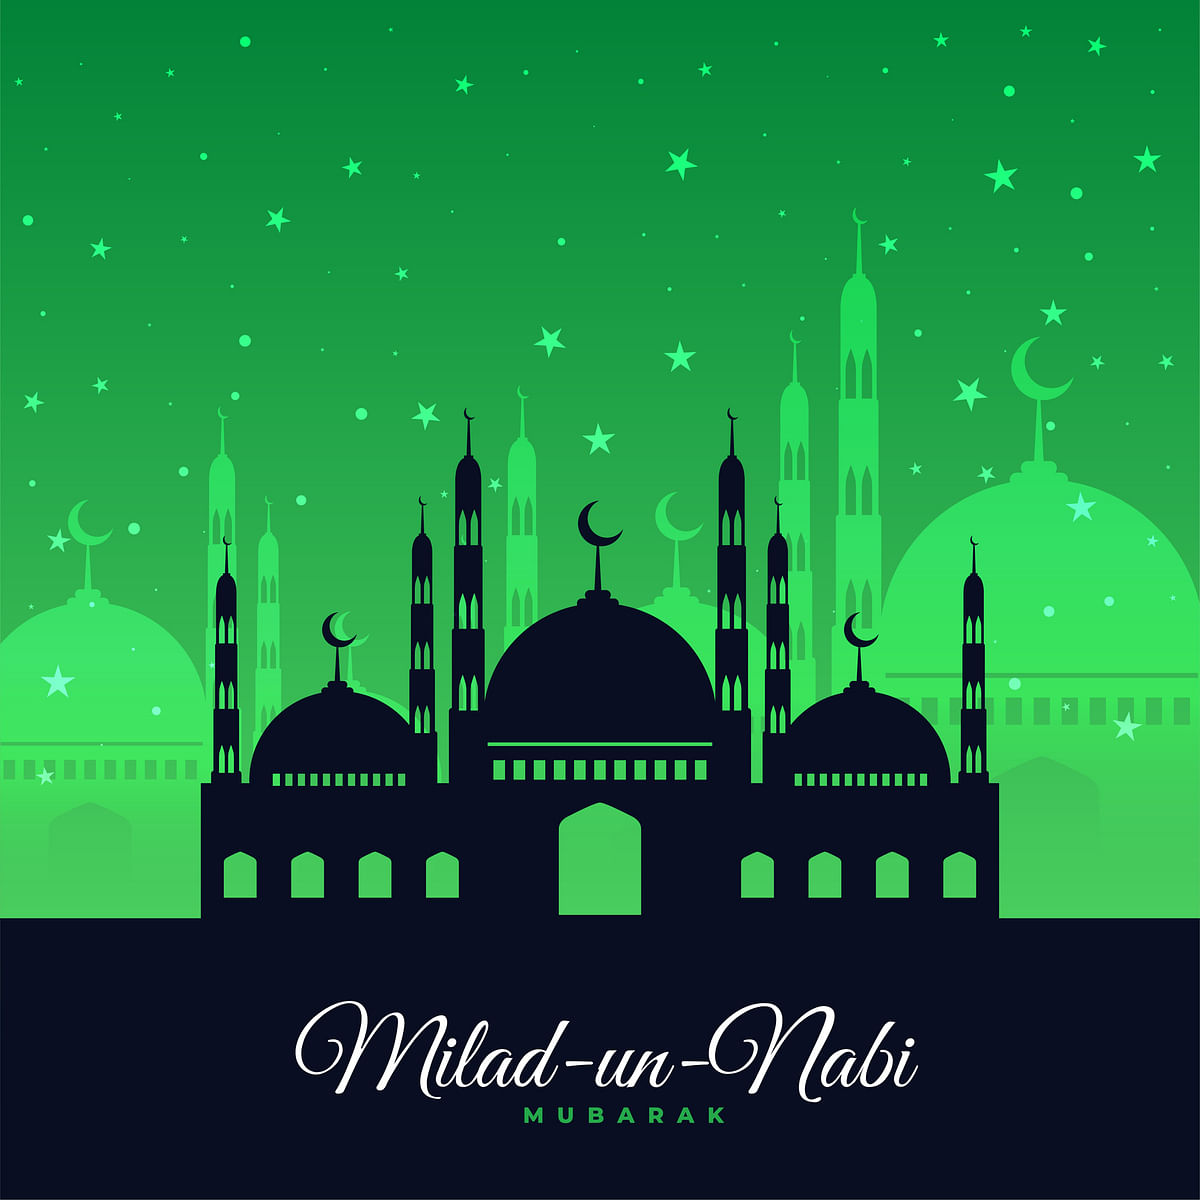 Eid Milad-un-Nabi wishes, quotes, images, cards for friends and family